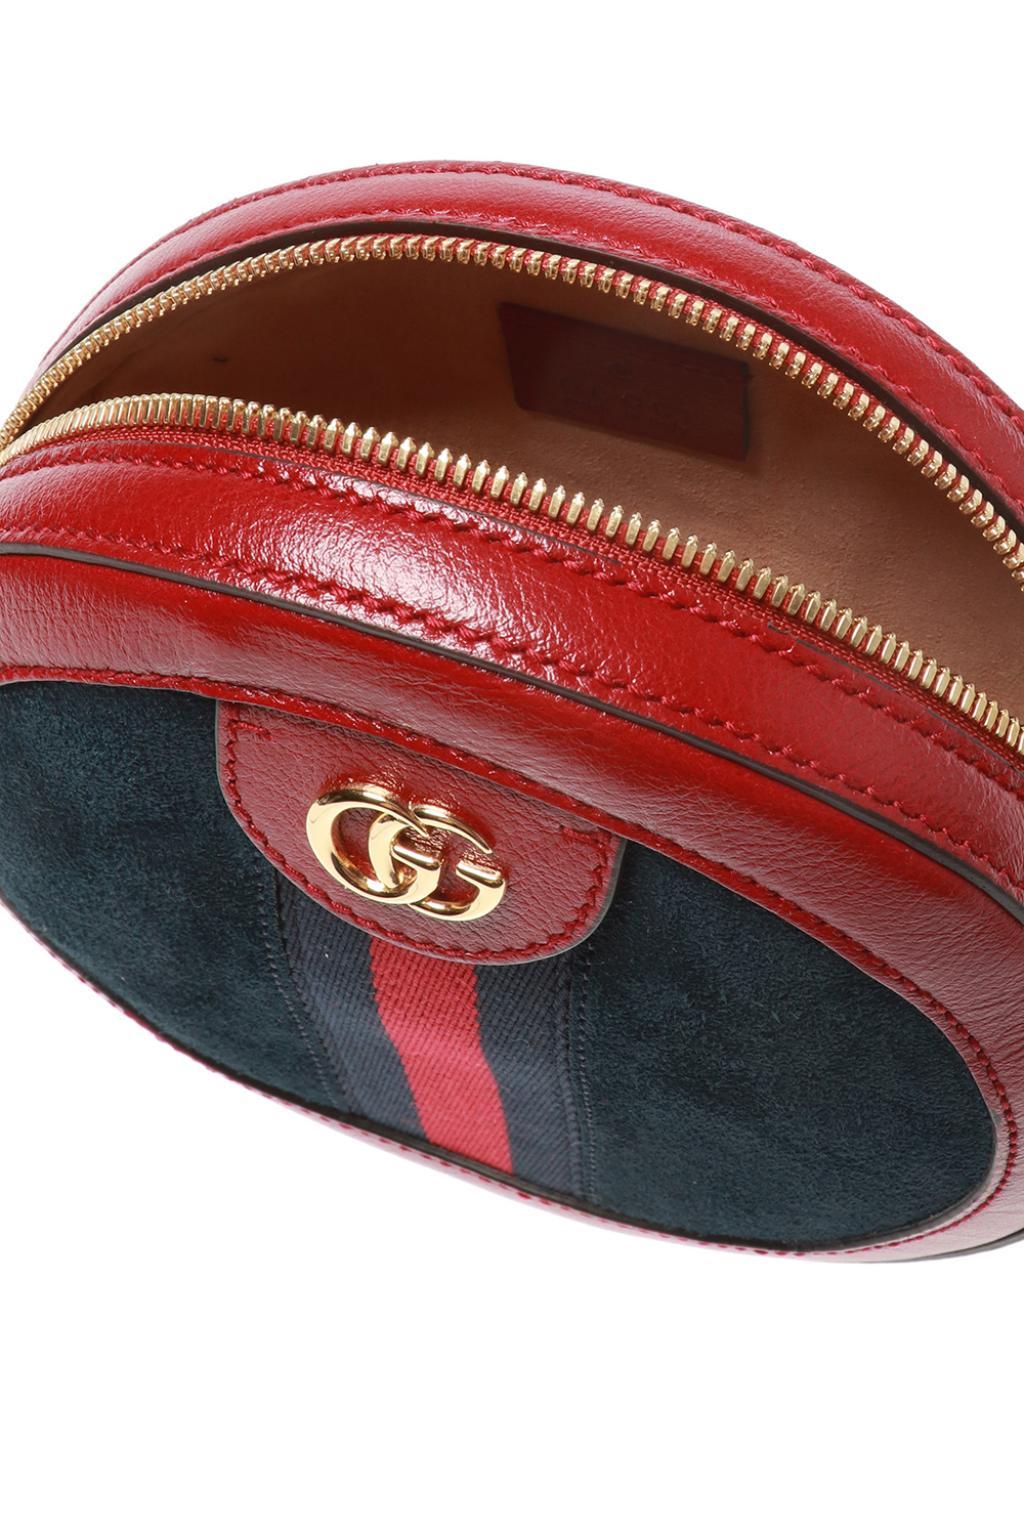 Gucci &#39;ophidia&#39; Shoulder Bag in Red - Lyst